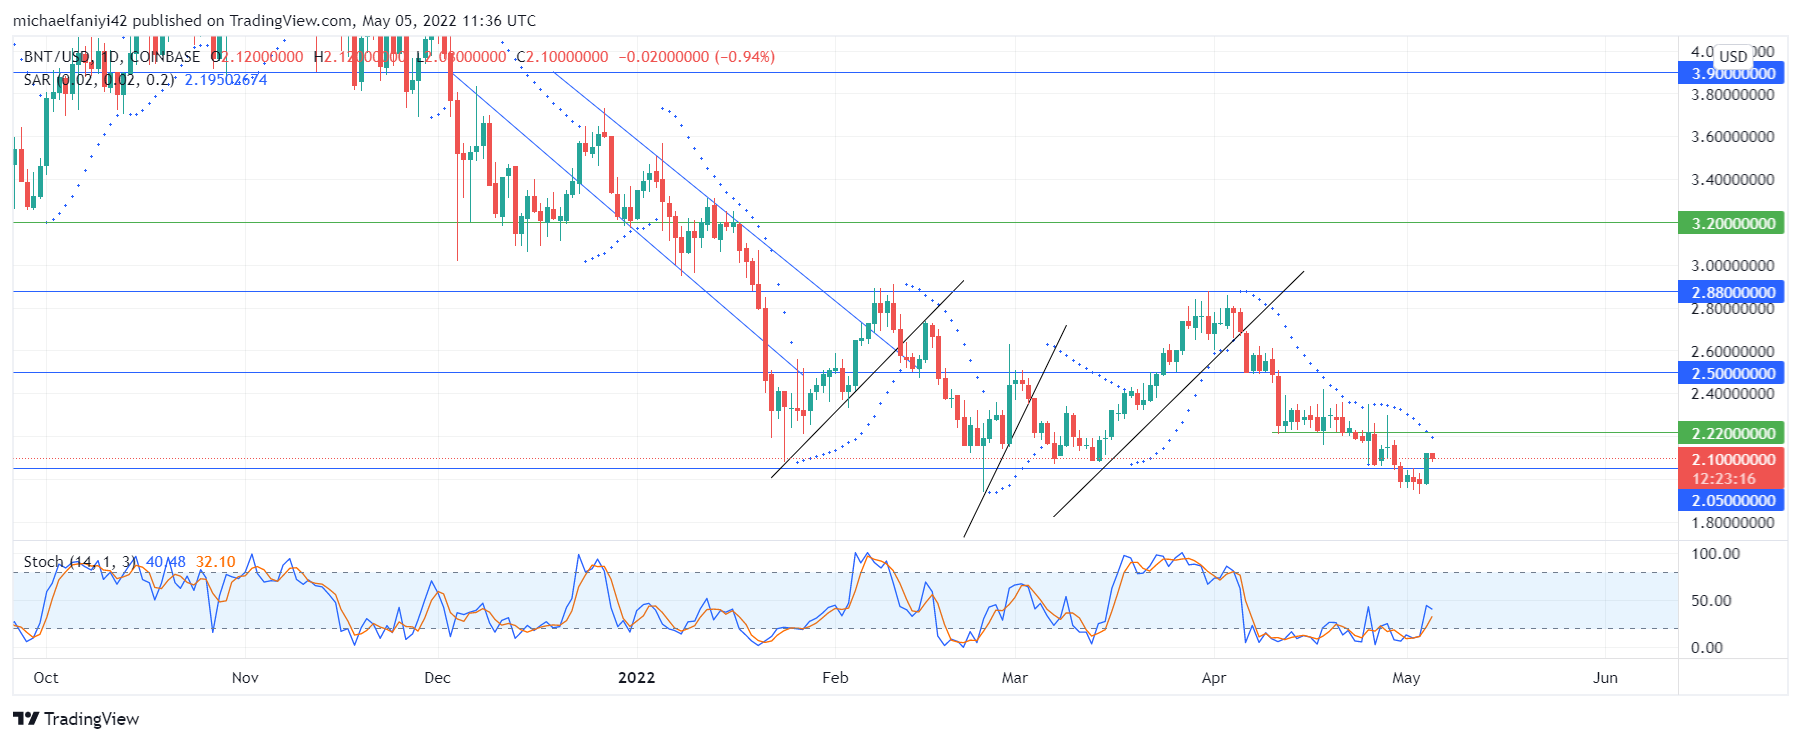 Bancor (BNTUSD) Aims for the $2.880 Resistance Level in Consolidation